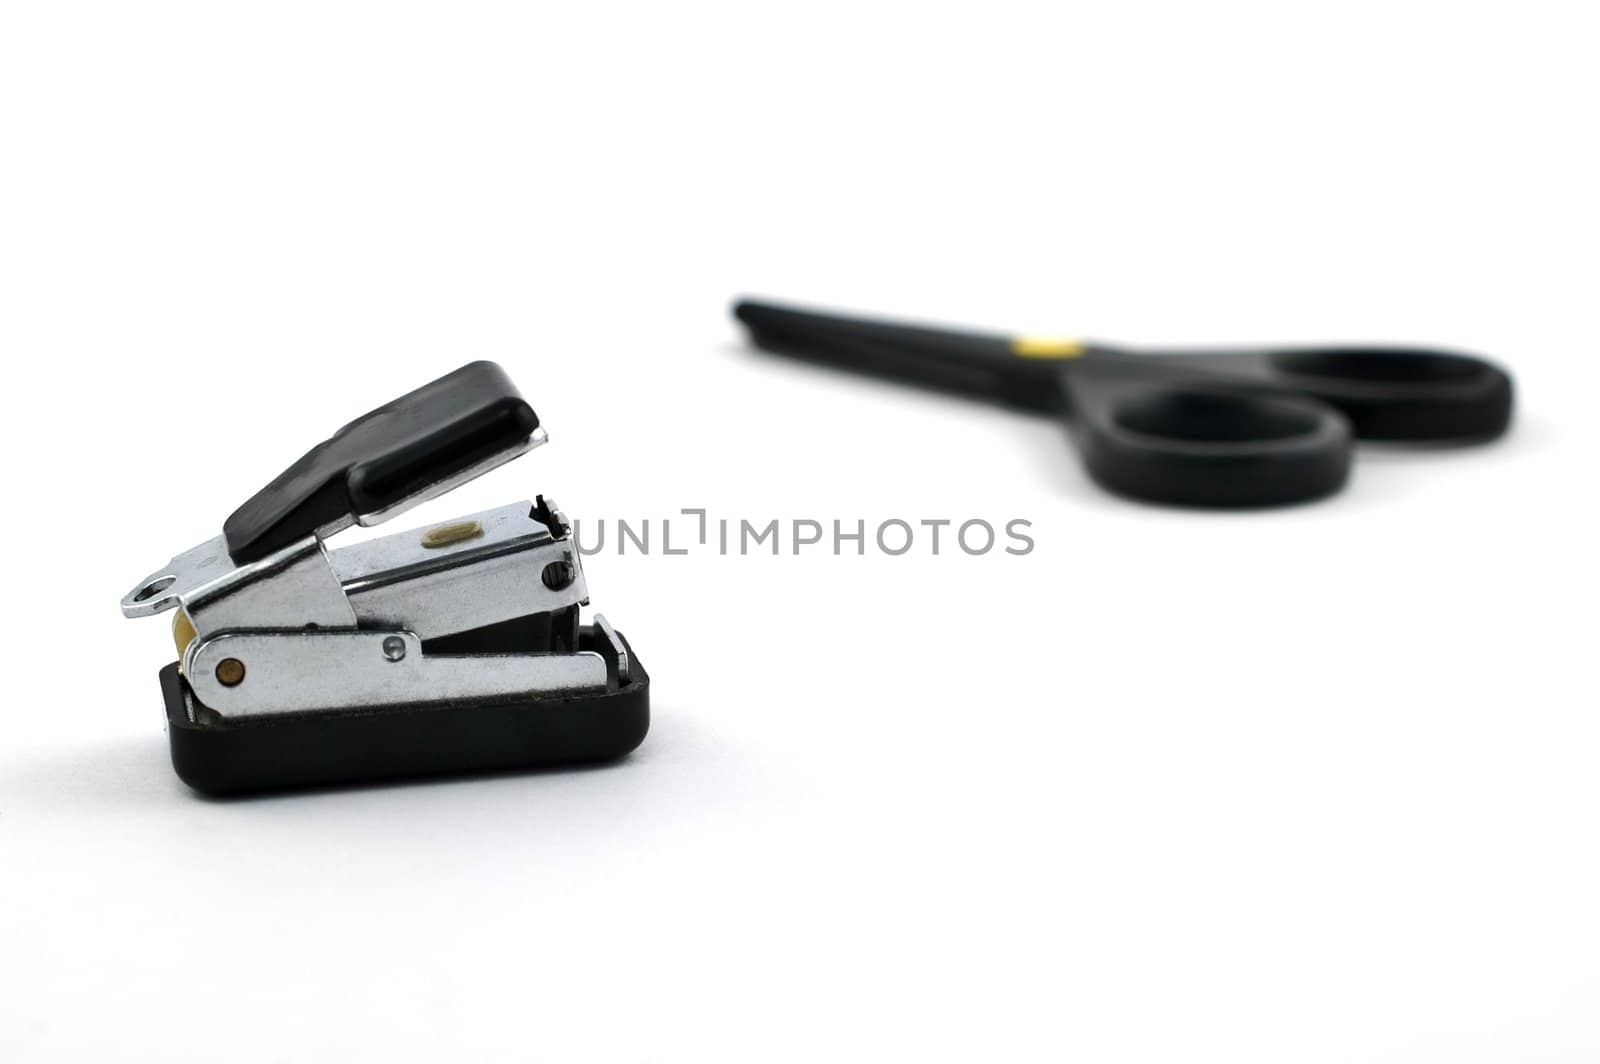 Stapler with safe scissors in the background isolated on white with shallow depth of field